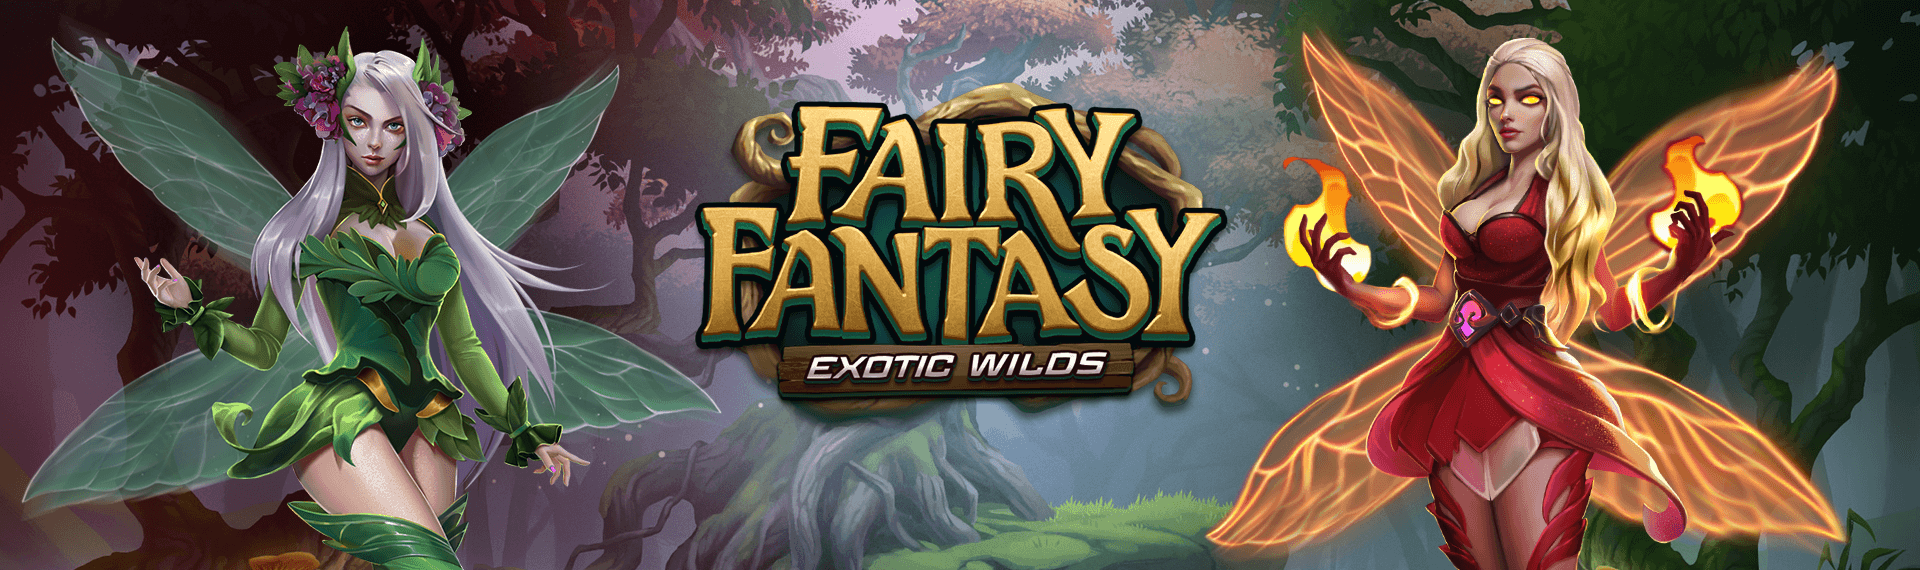 Fairy Fantasy Exotic Wilds Screenshot <br />
<b>Notice</b>:  Undefined variable: key in <b>/var/www/html/wp-content/themes/armadillo/page-game.php</b> on line <b>37</b><br />
1